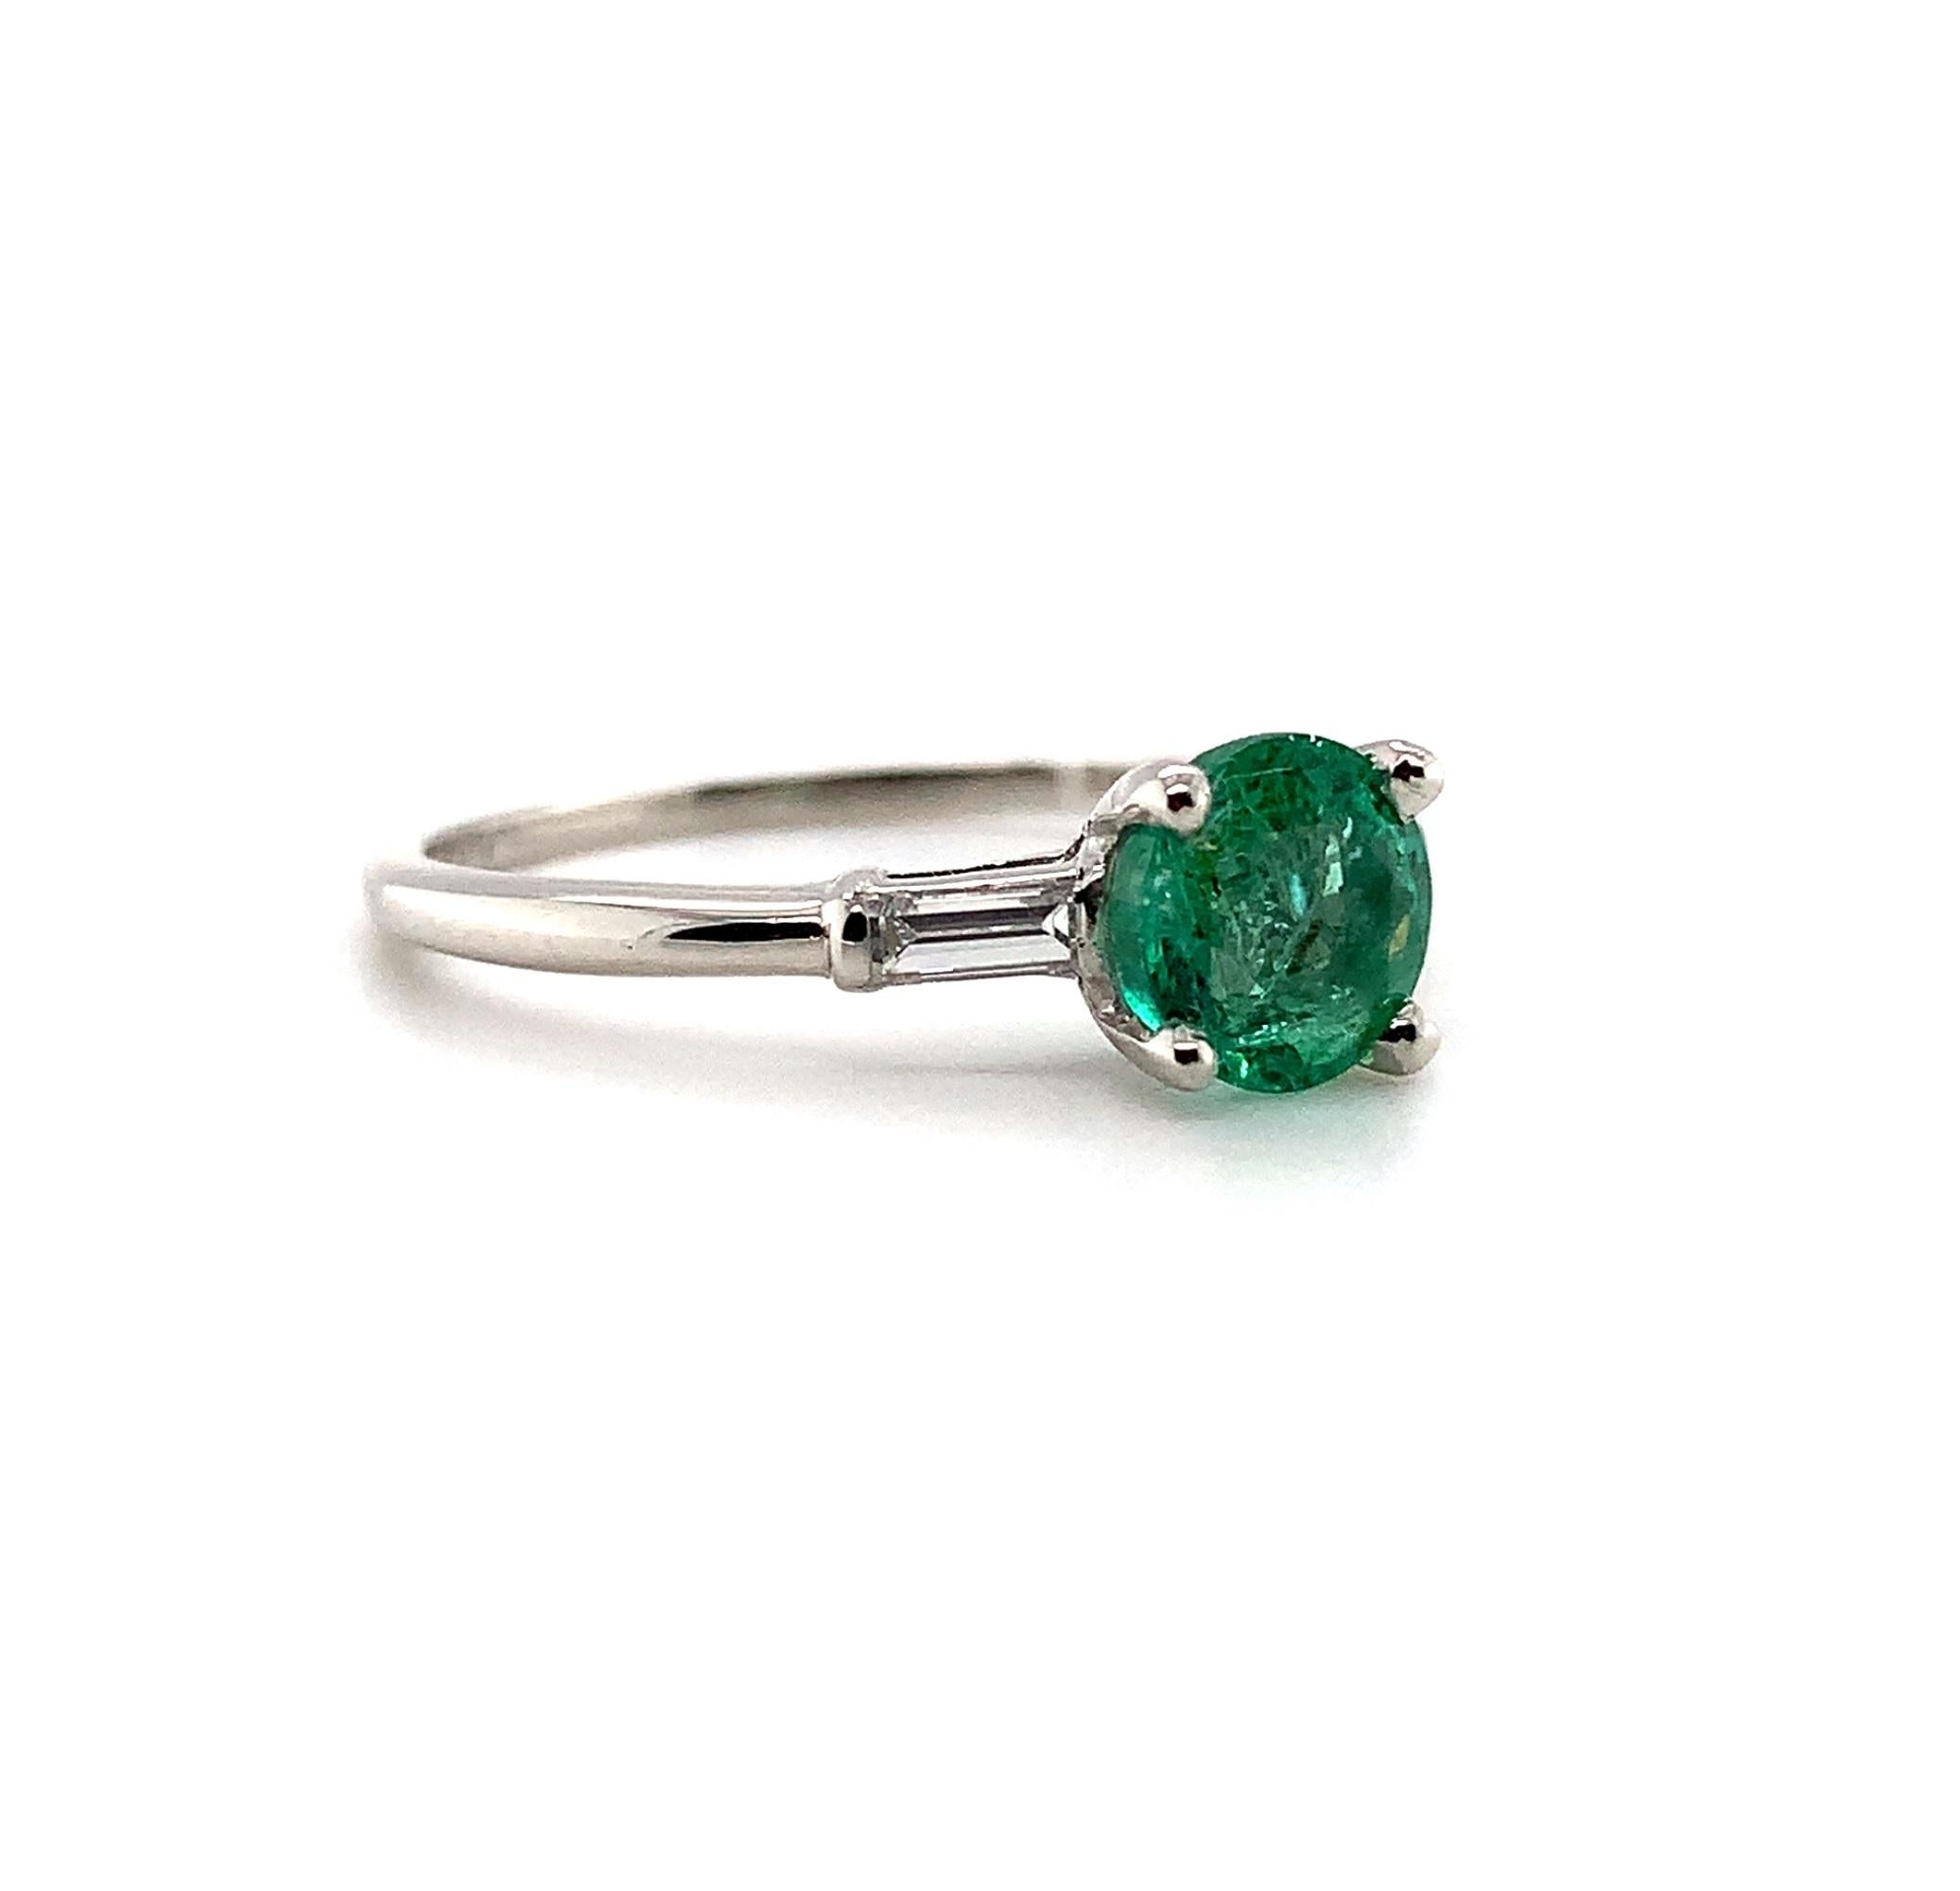 Platinum emerald and diamond ring featuring a round emerald weighing .83cts. The emerald has crisp mint green color and fine clarity. It measures about 6 mm. The emerald is accented by 2 baguette diamonds measuring about 3.5mm x 1.7mm and weighing